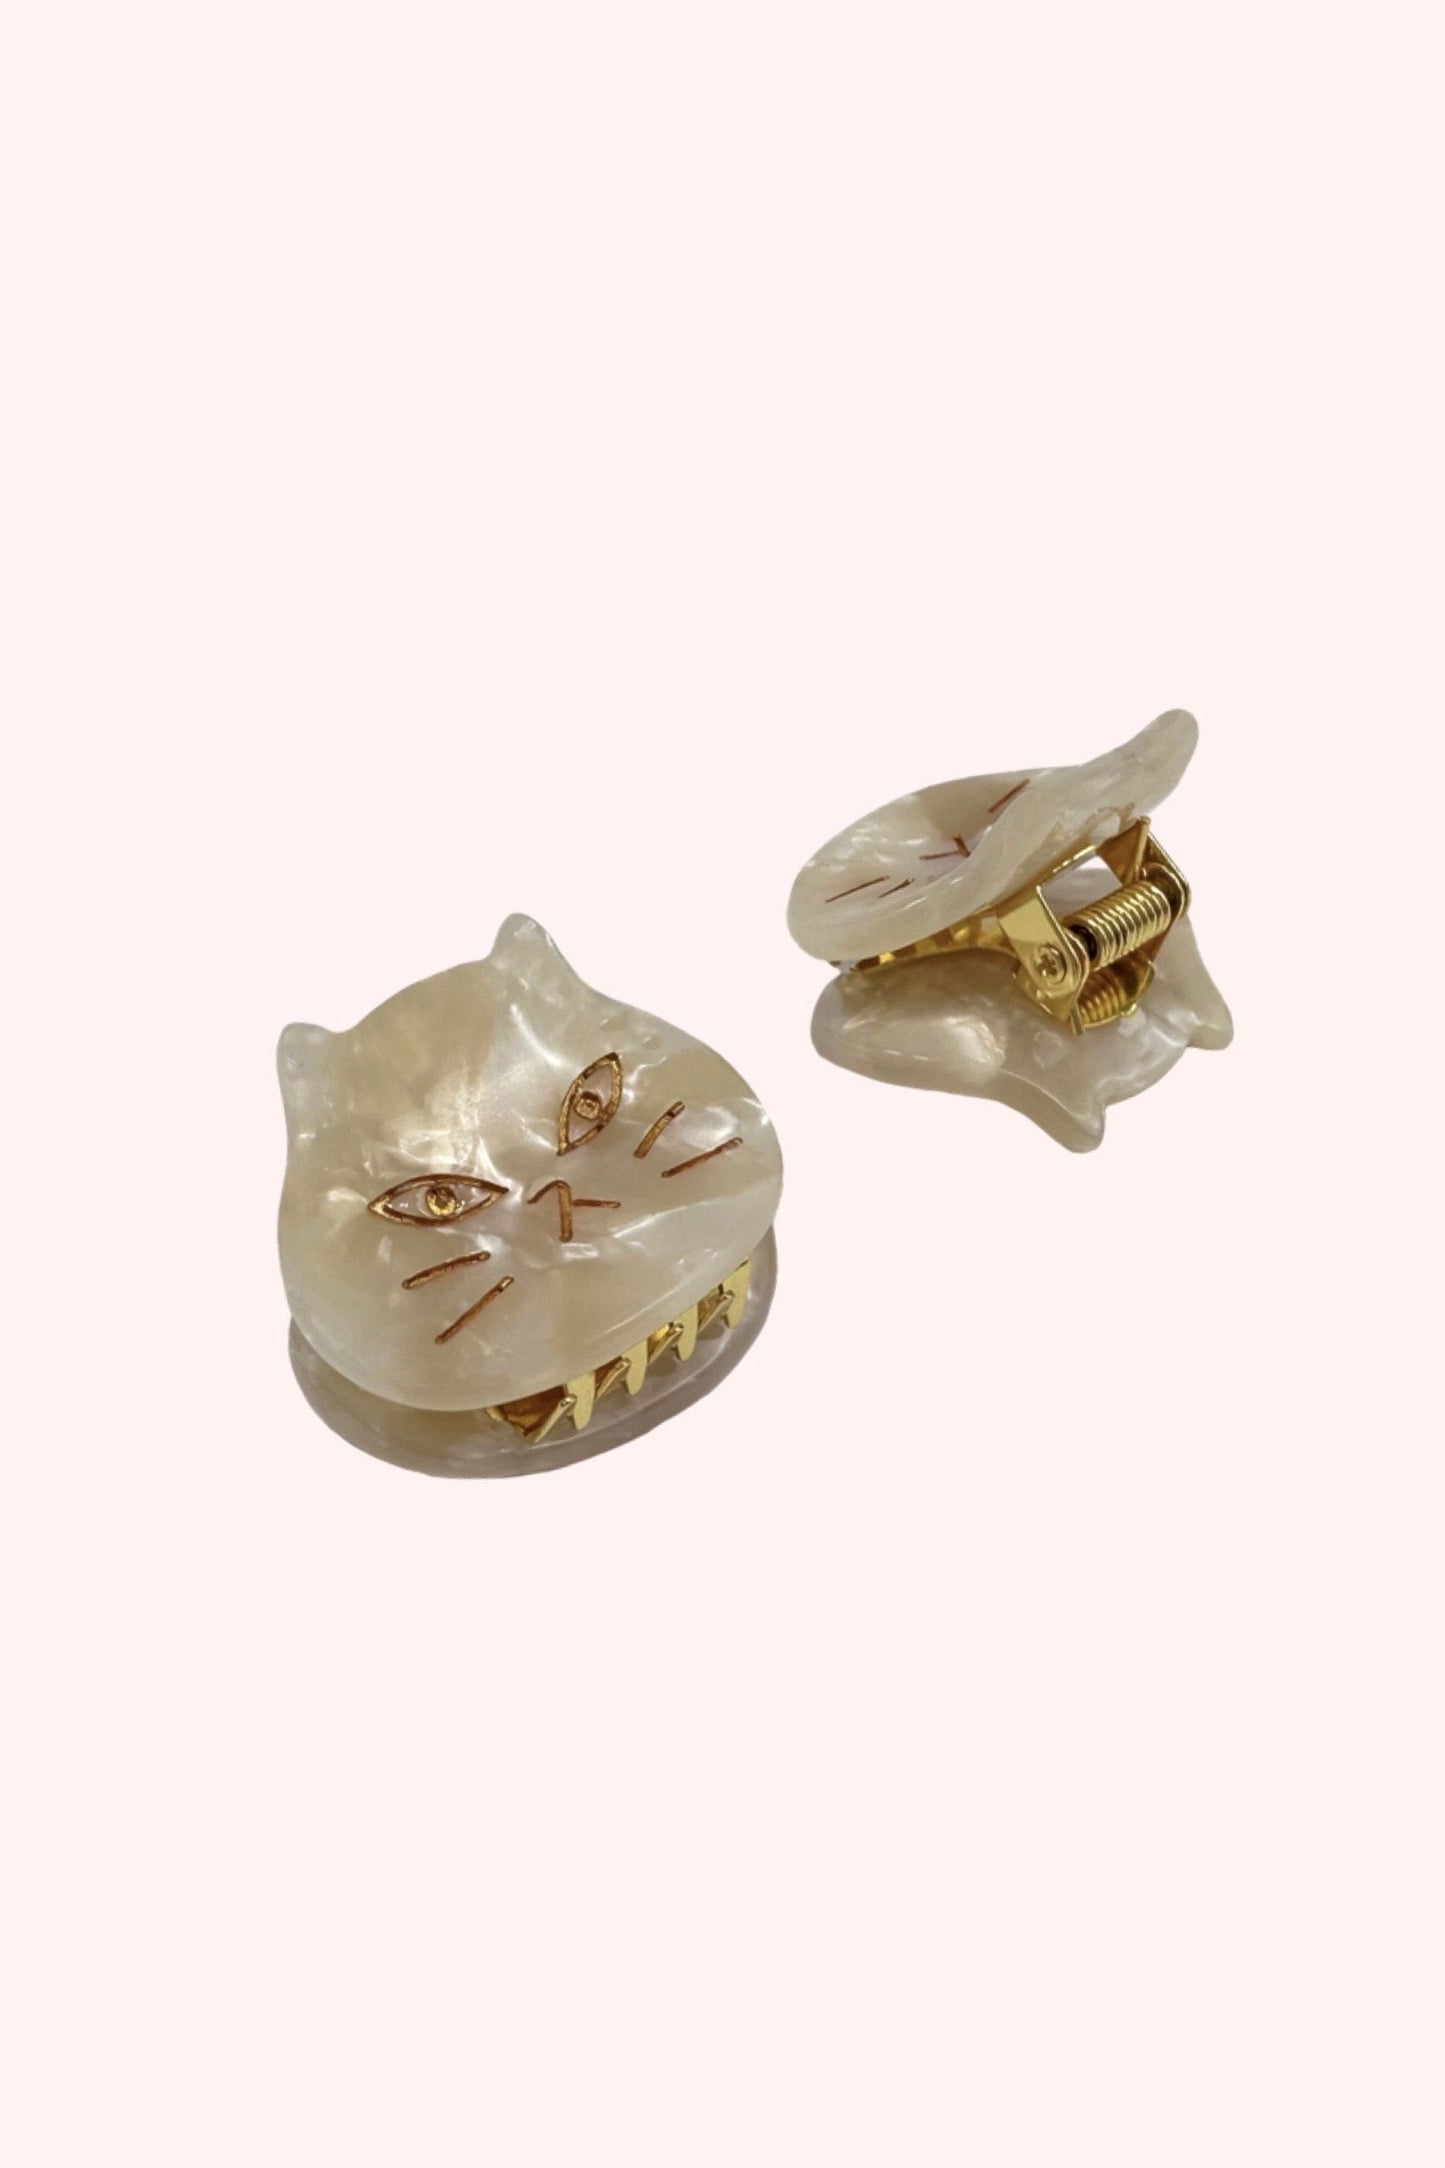 Cat's Meow Jaw Clip Pair, ivory cat head on a golden jaw clip to add some fun to your hairstyle